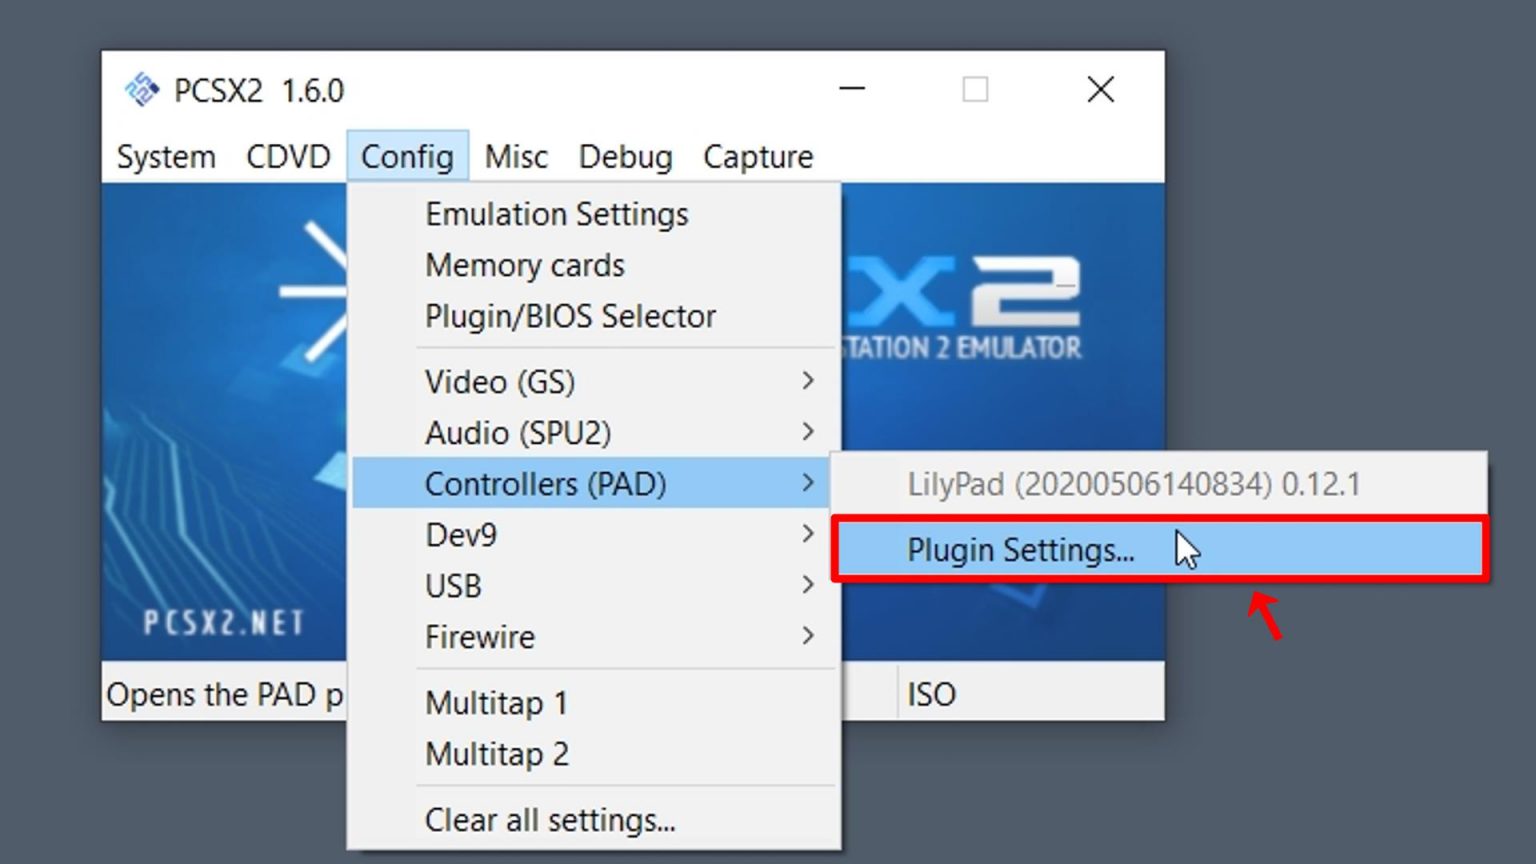 pcsx2 not recognizing controllers or keyboard